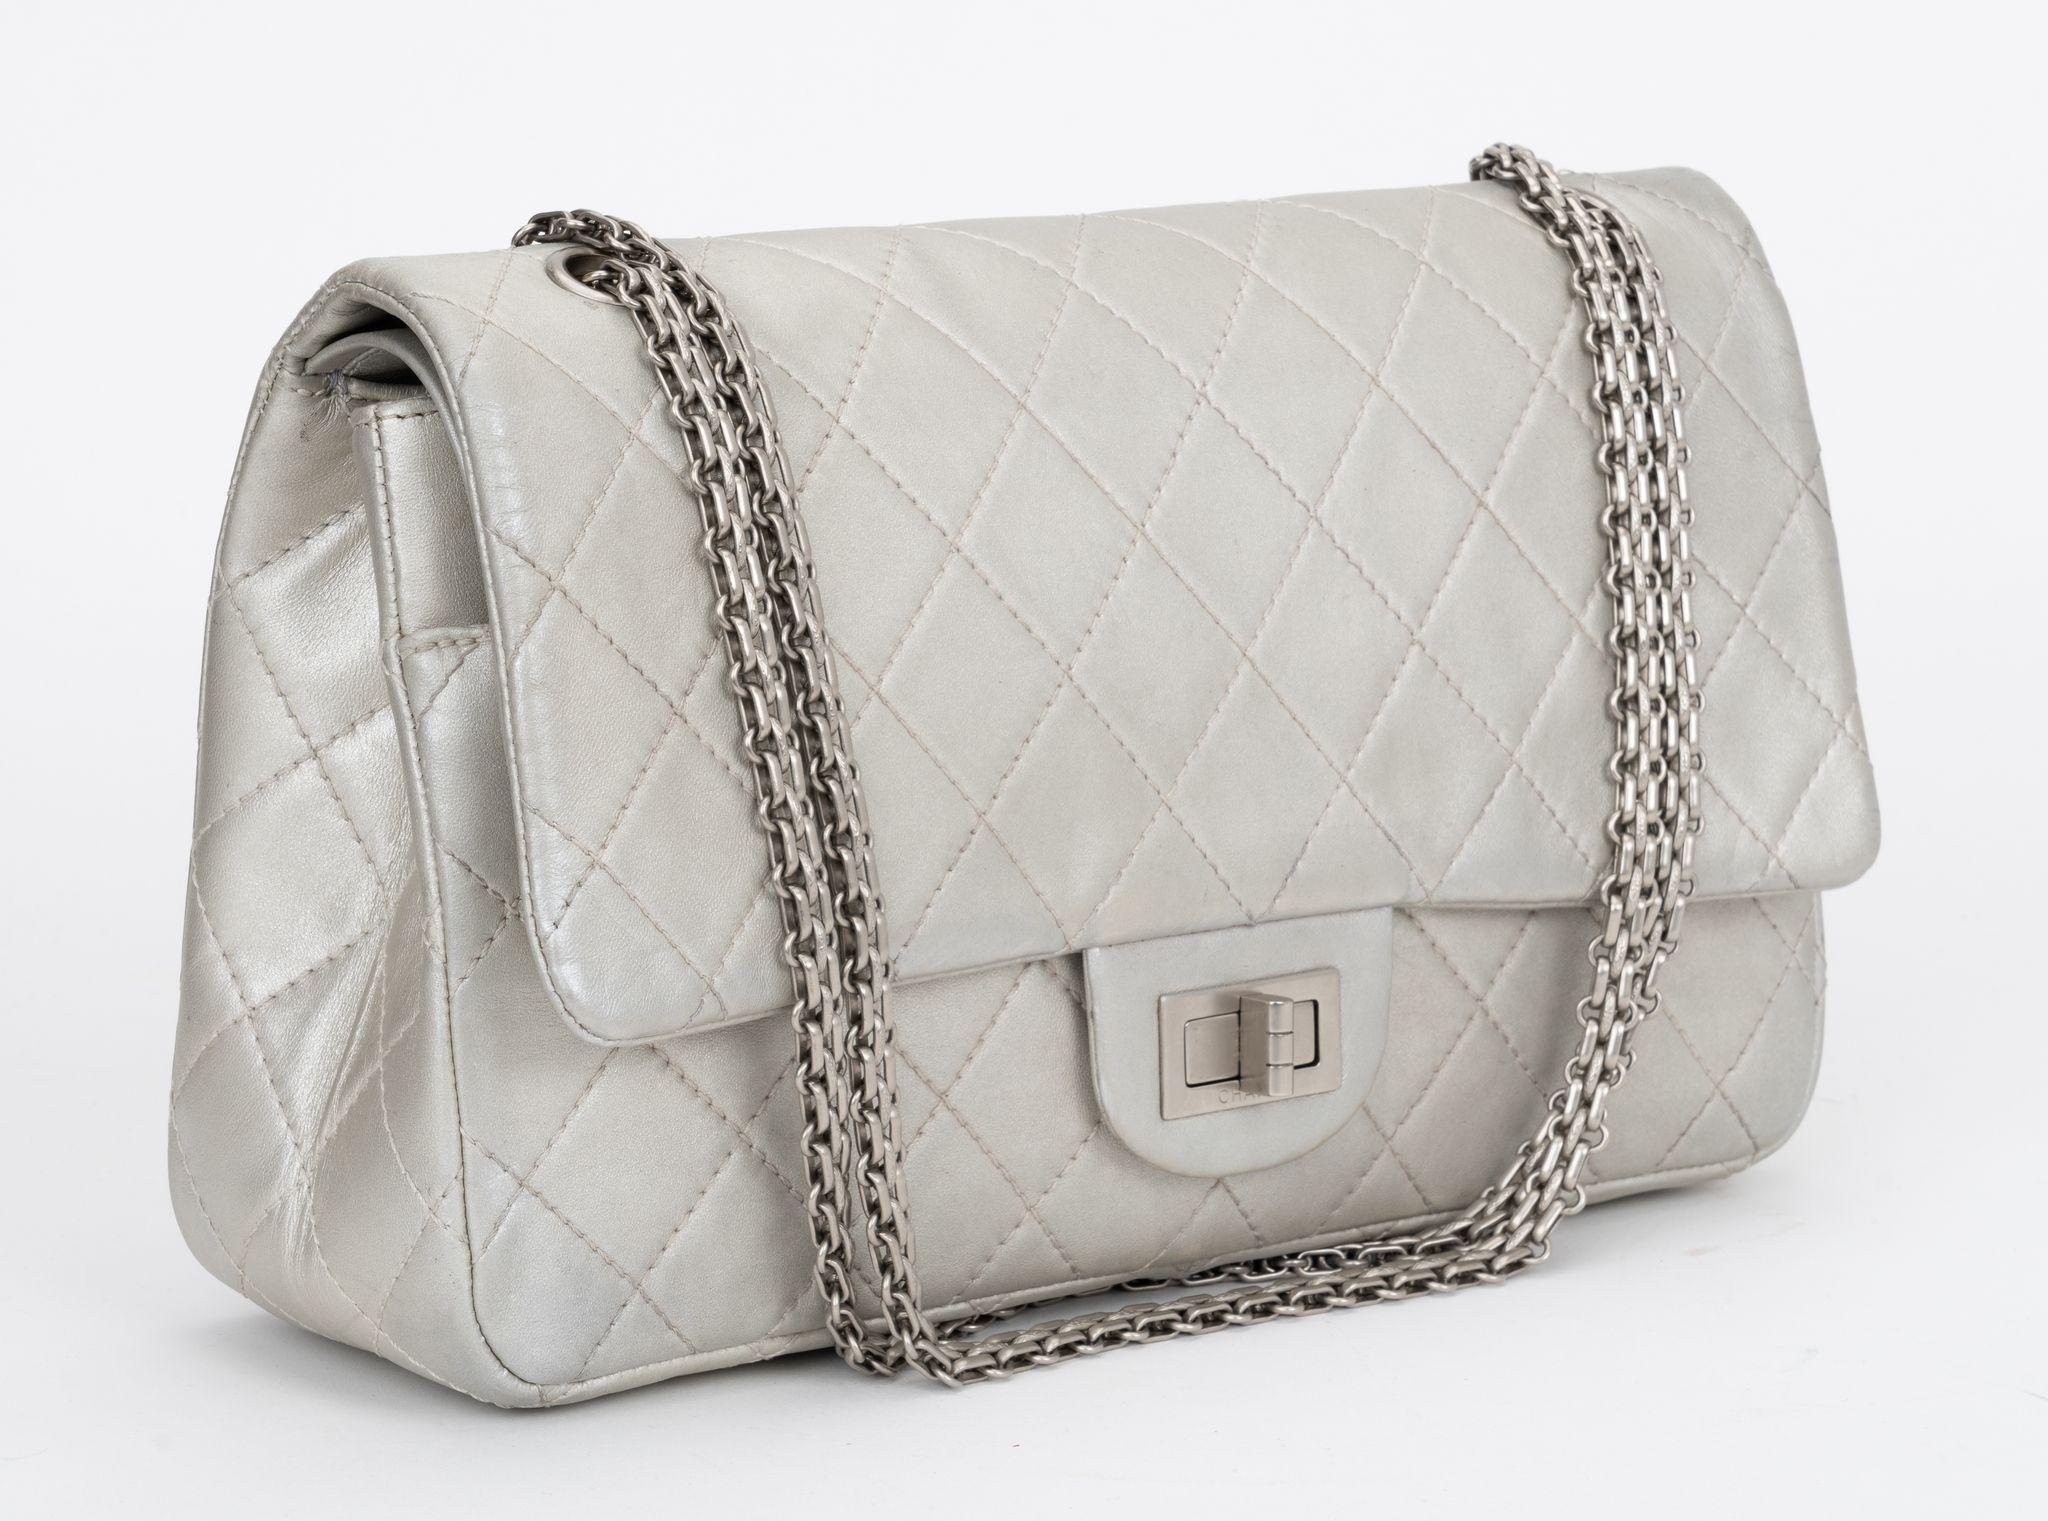 Chanel jumbo reissue double-flap bag. Metallic silver leather and silver metal. Can be worn cross body. Shoulder drop: 11